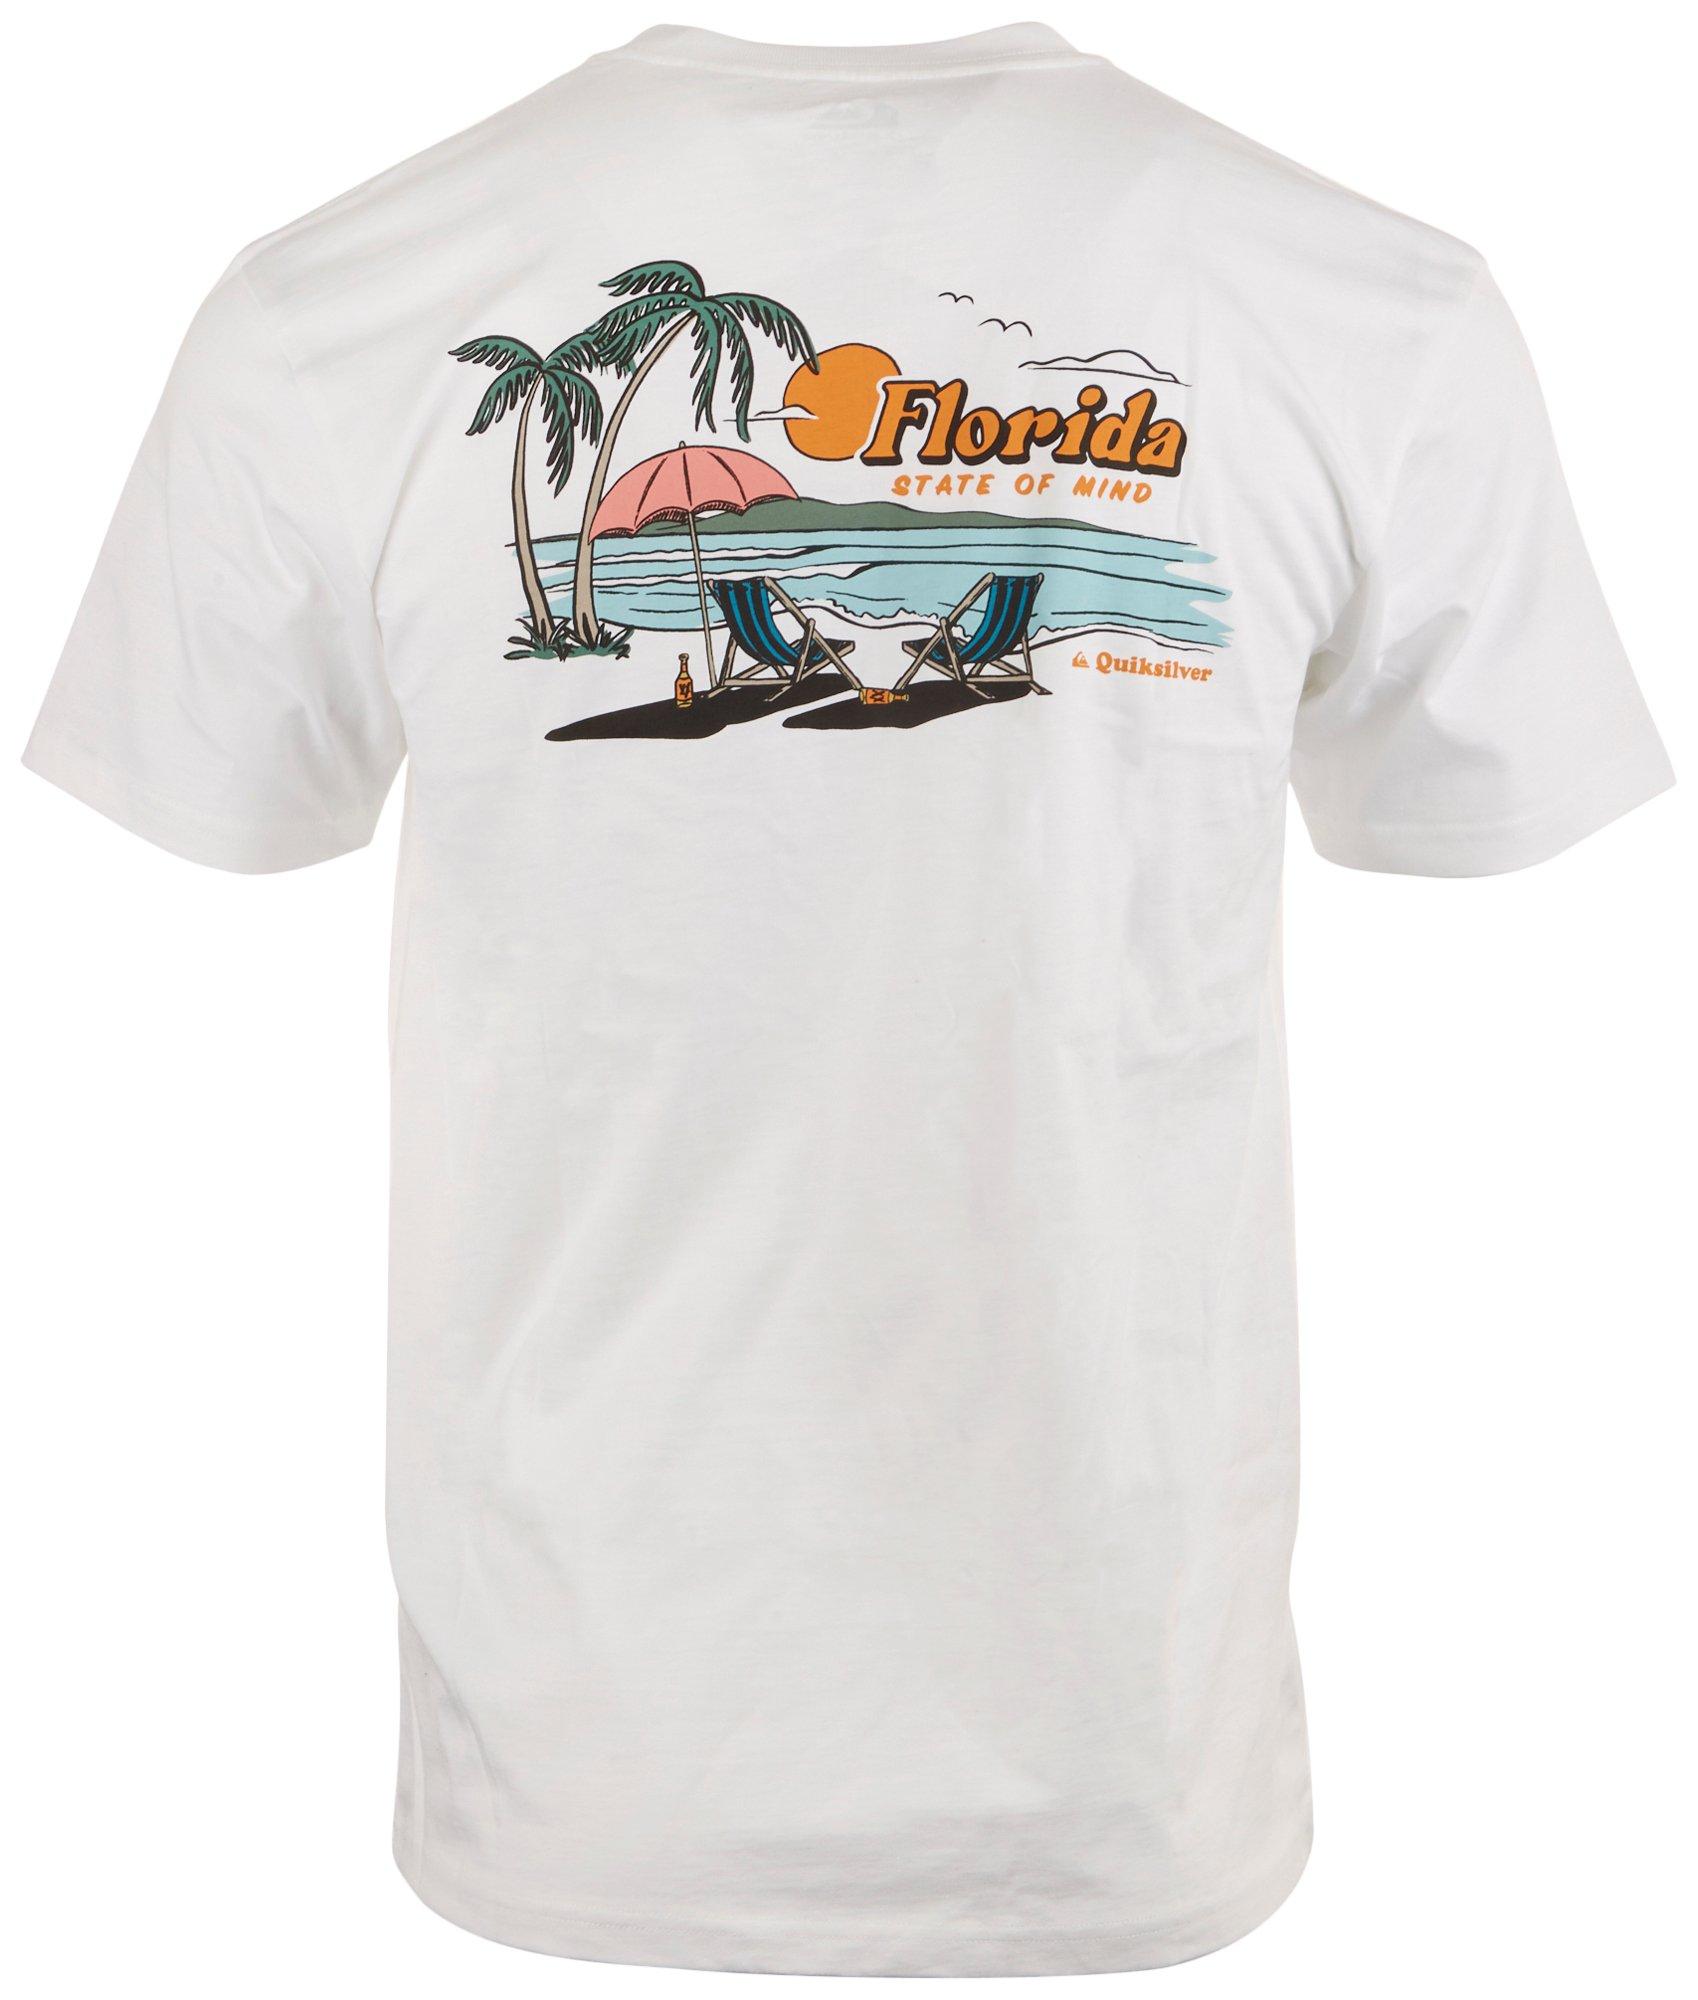 Quiksilver Mens Florida State of Mind Short Sleeve